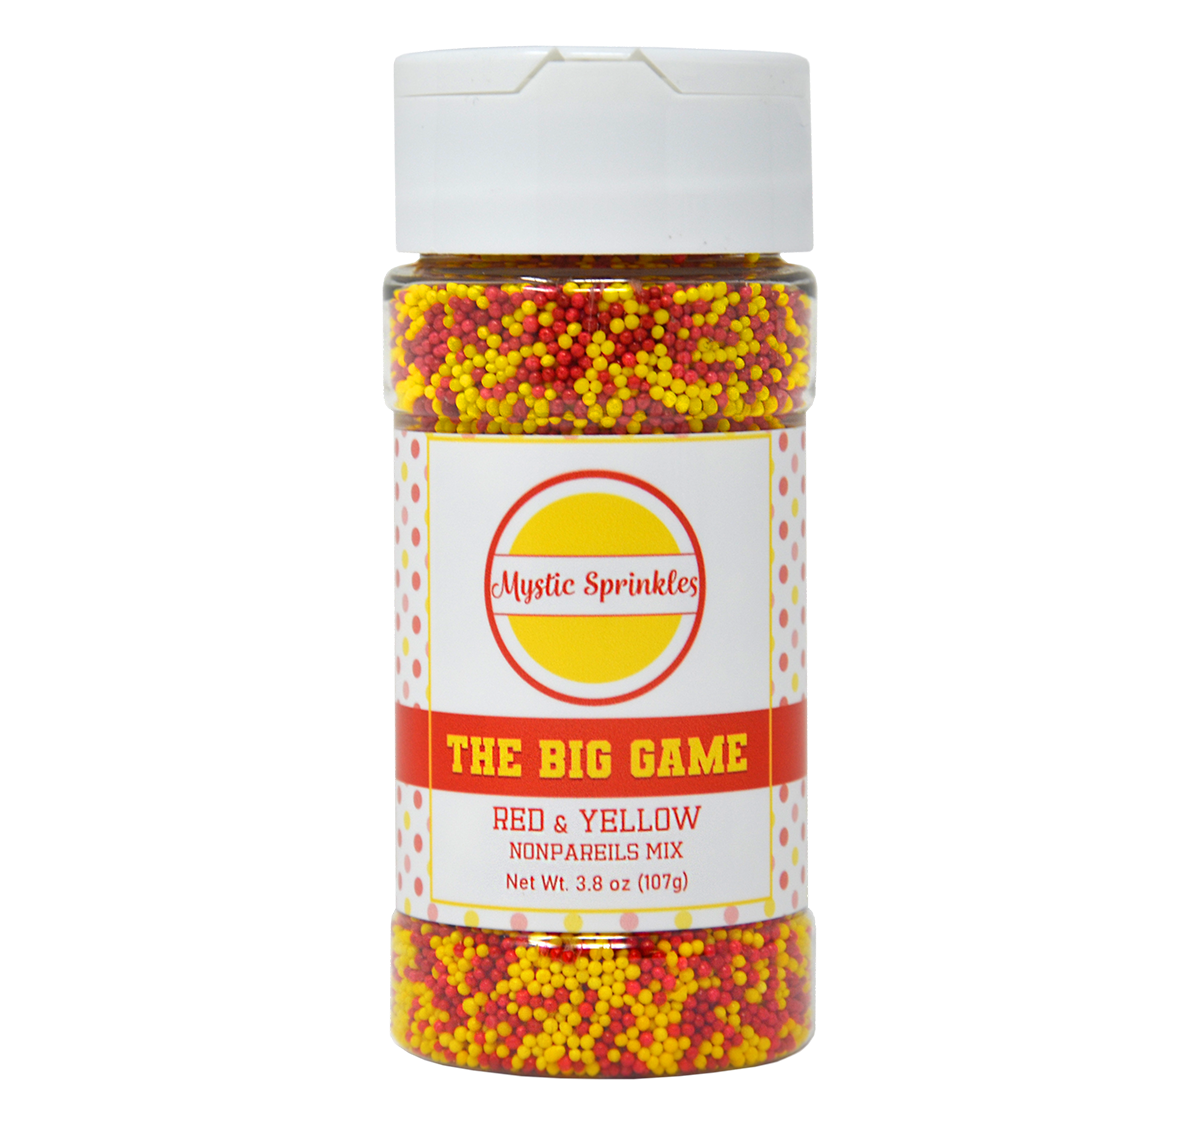 The Big Game: Red & Yellow Nonpareils Mix 3.8oz Bottle